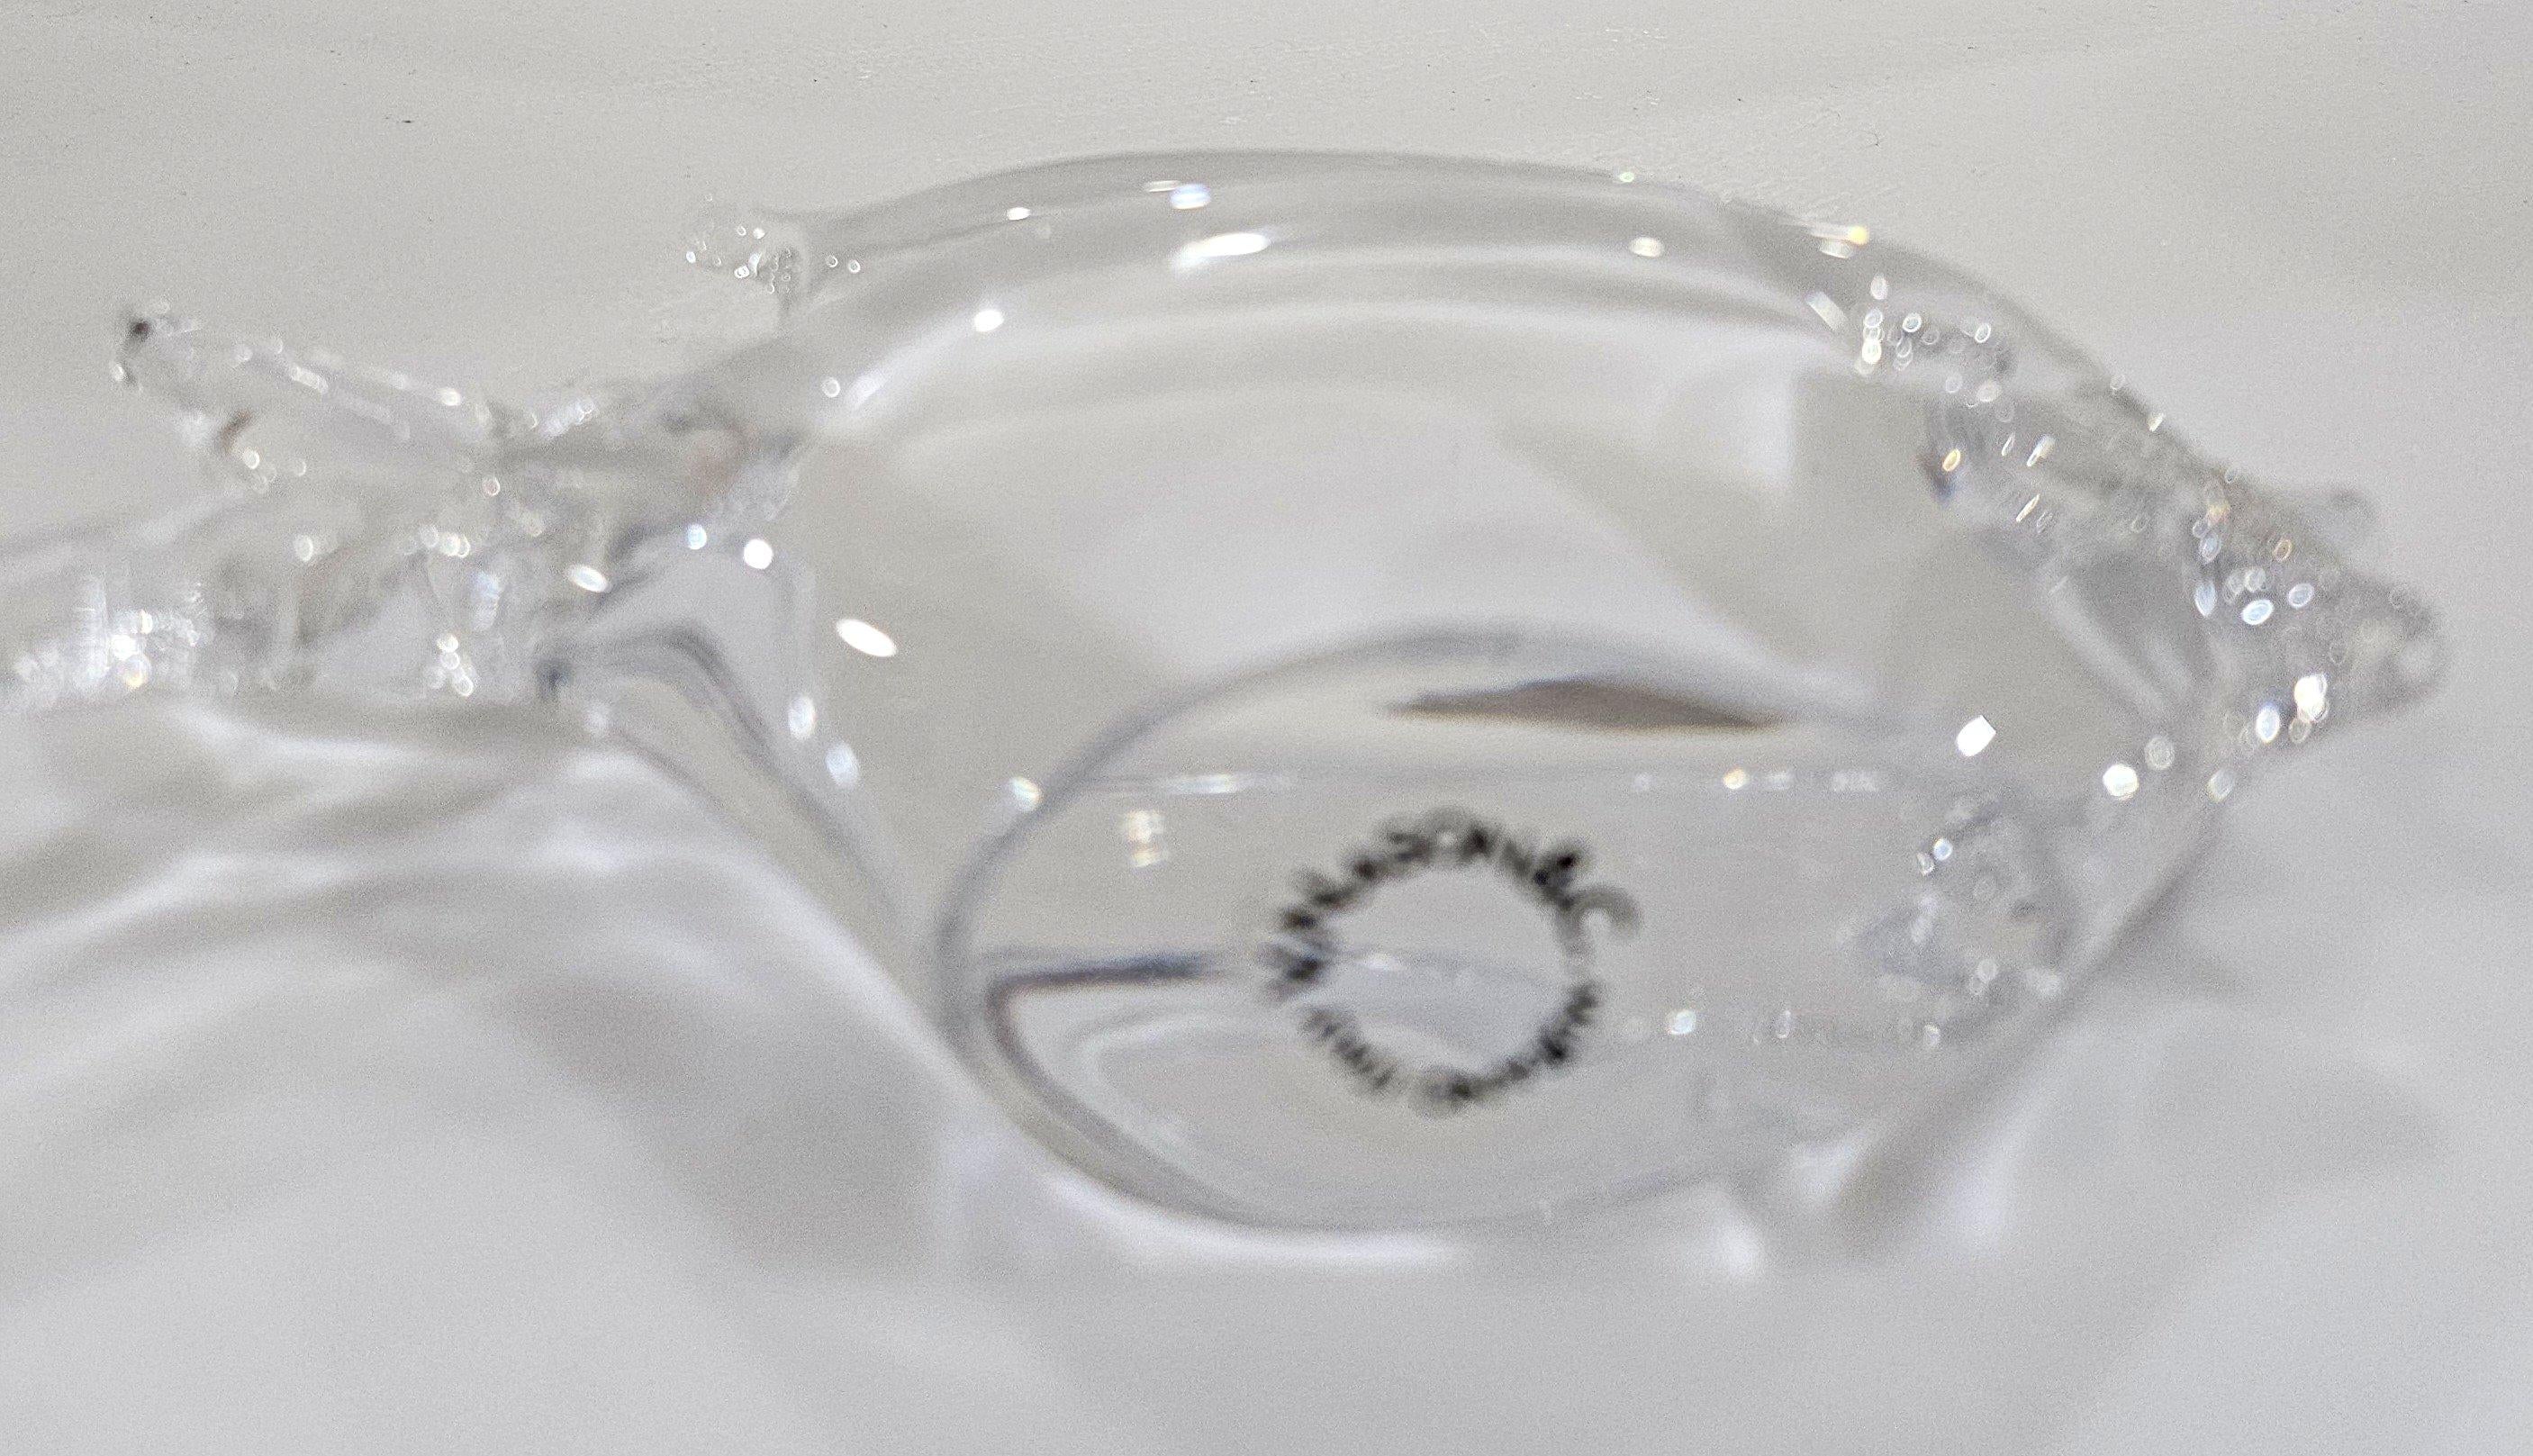 Vintage Murano Glass Fish by V. Nason, Italy. Labelled thusly.
Very nice vintage condition with the original label.
Apx 5.5 x 4 x 1.5 inches.
Incidental bubbles are a natural part of handblown glass.


Measurements are approximate. Please be aware